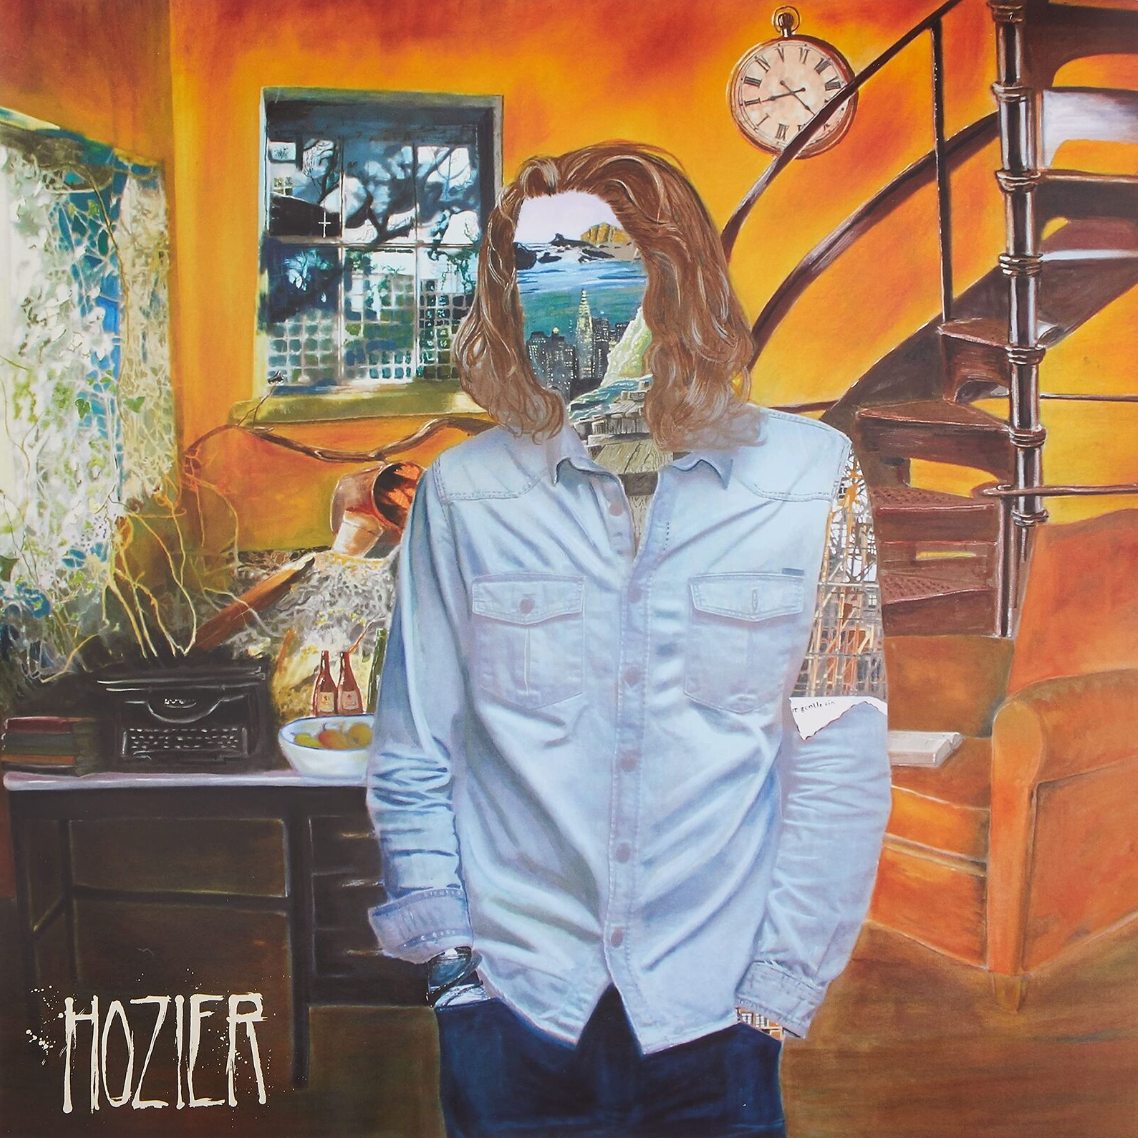 Hozier - Hozier - 3 x LP with a CD